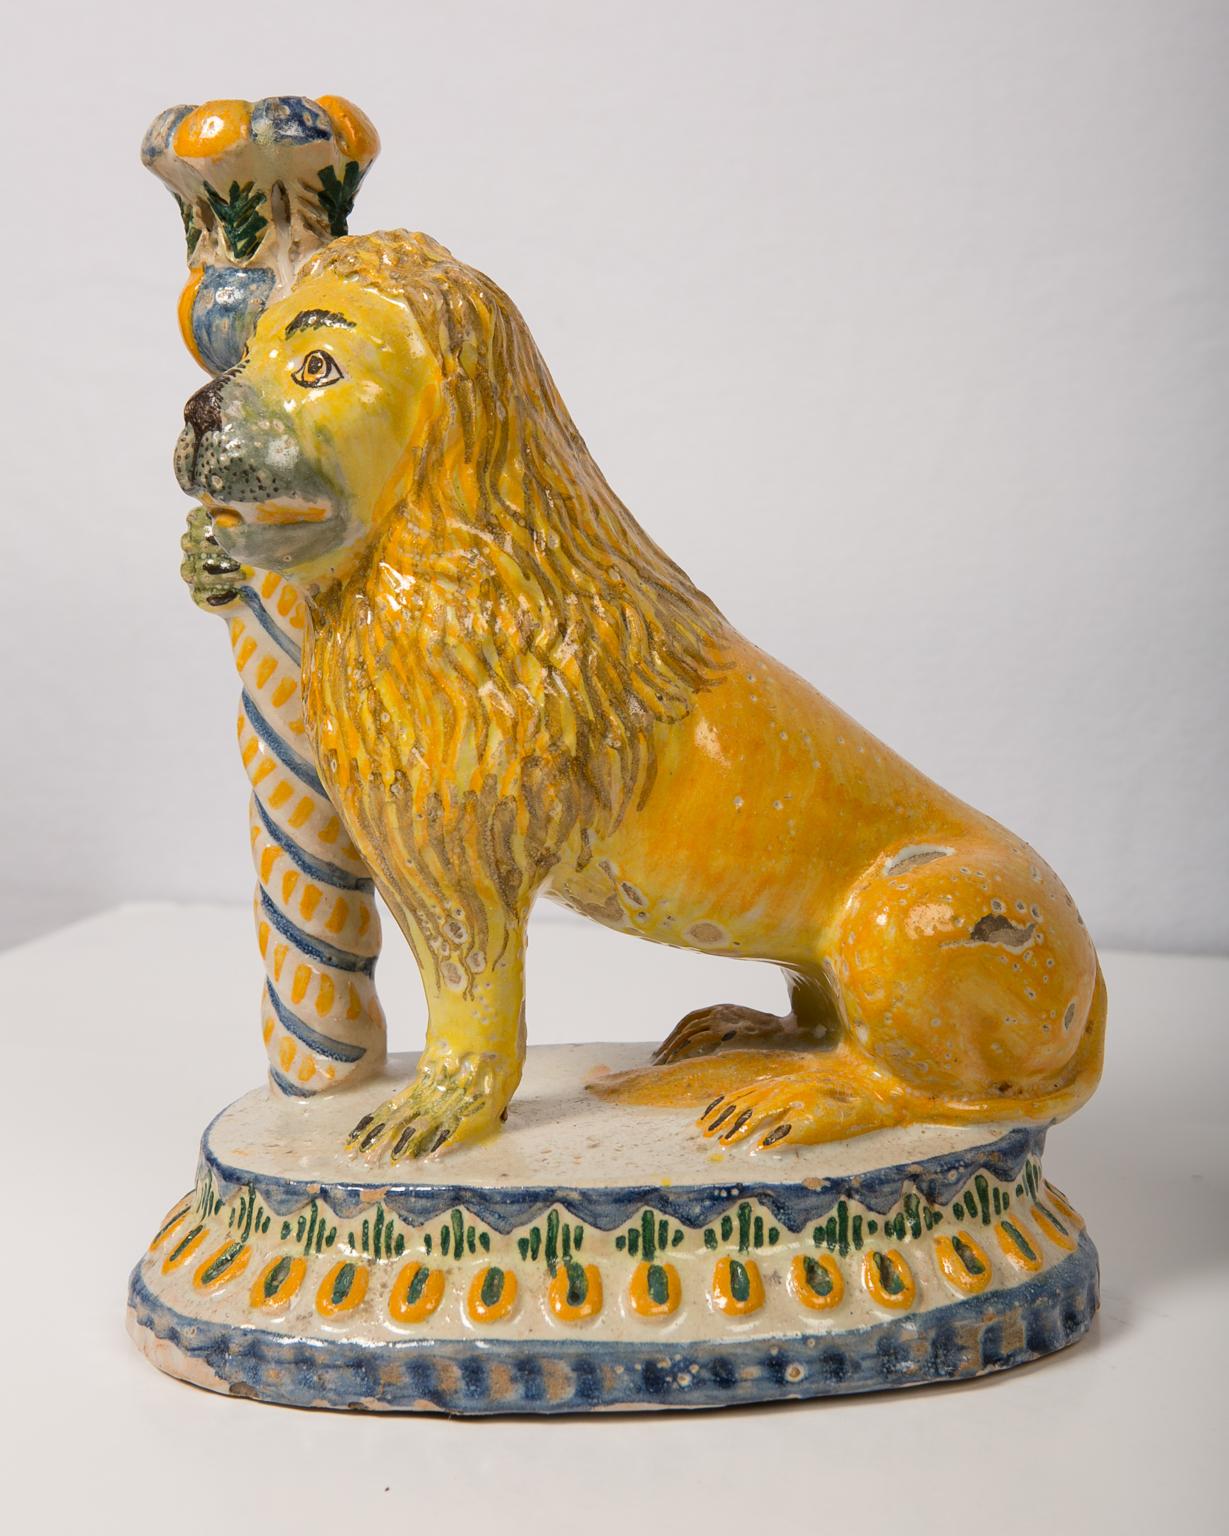 Pair of Antique Faience Lions Mid-19th Century (Fayence)